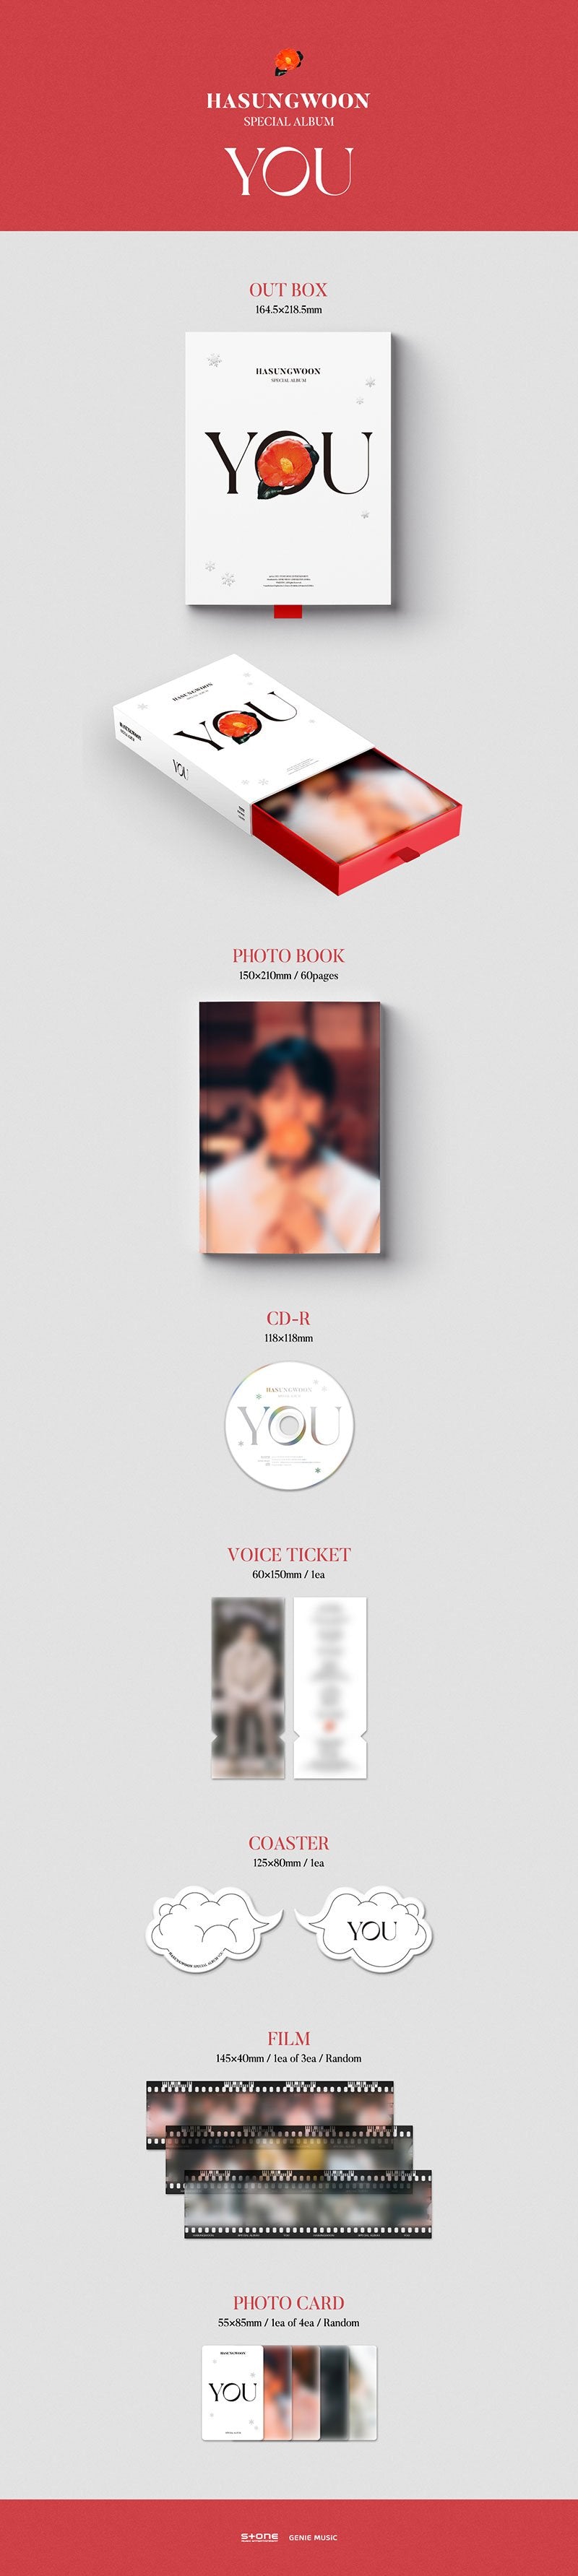 Ha Sung Woon - YOU (Special Album)